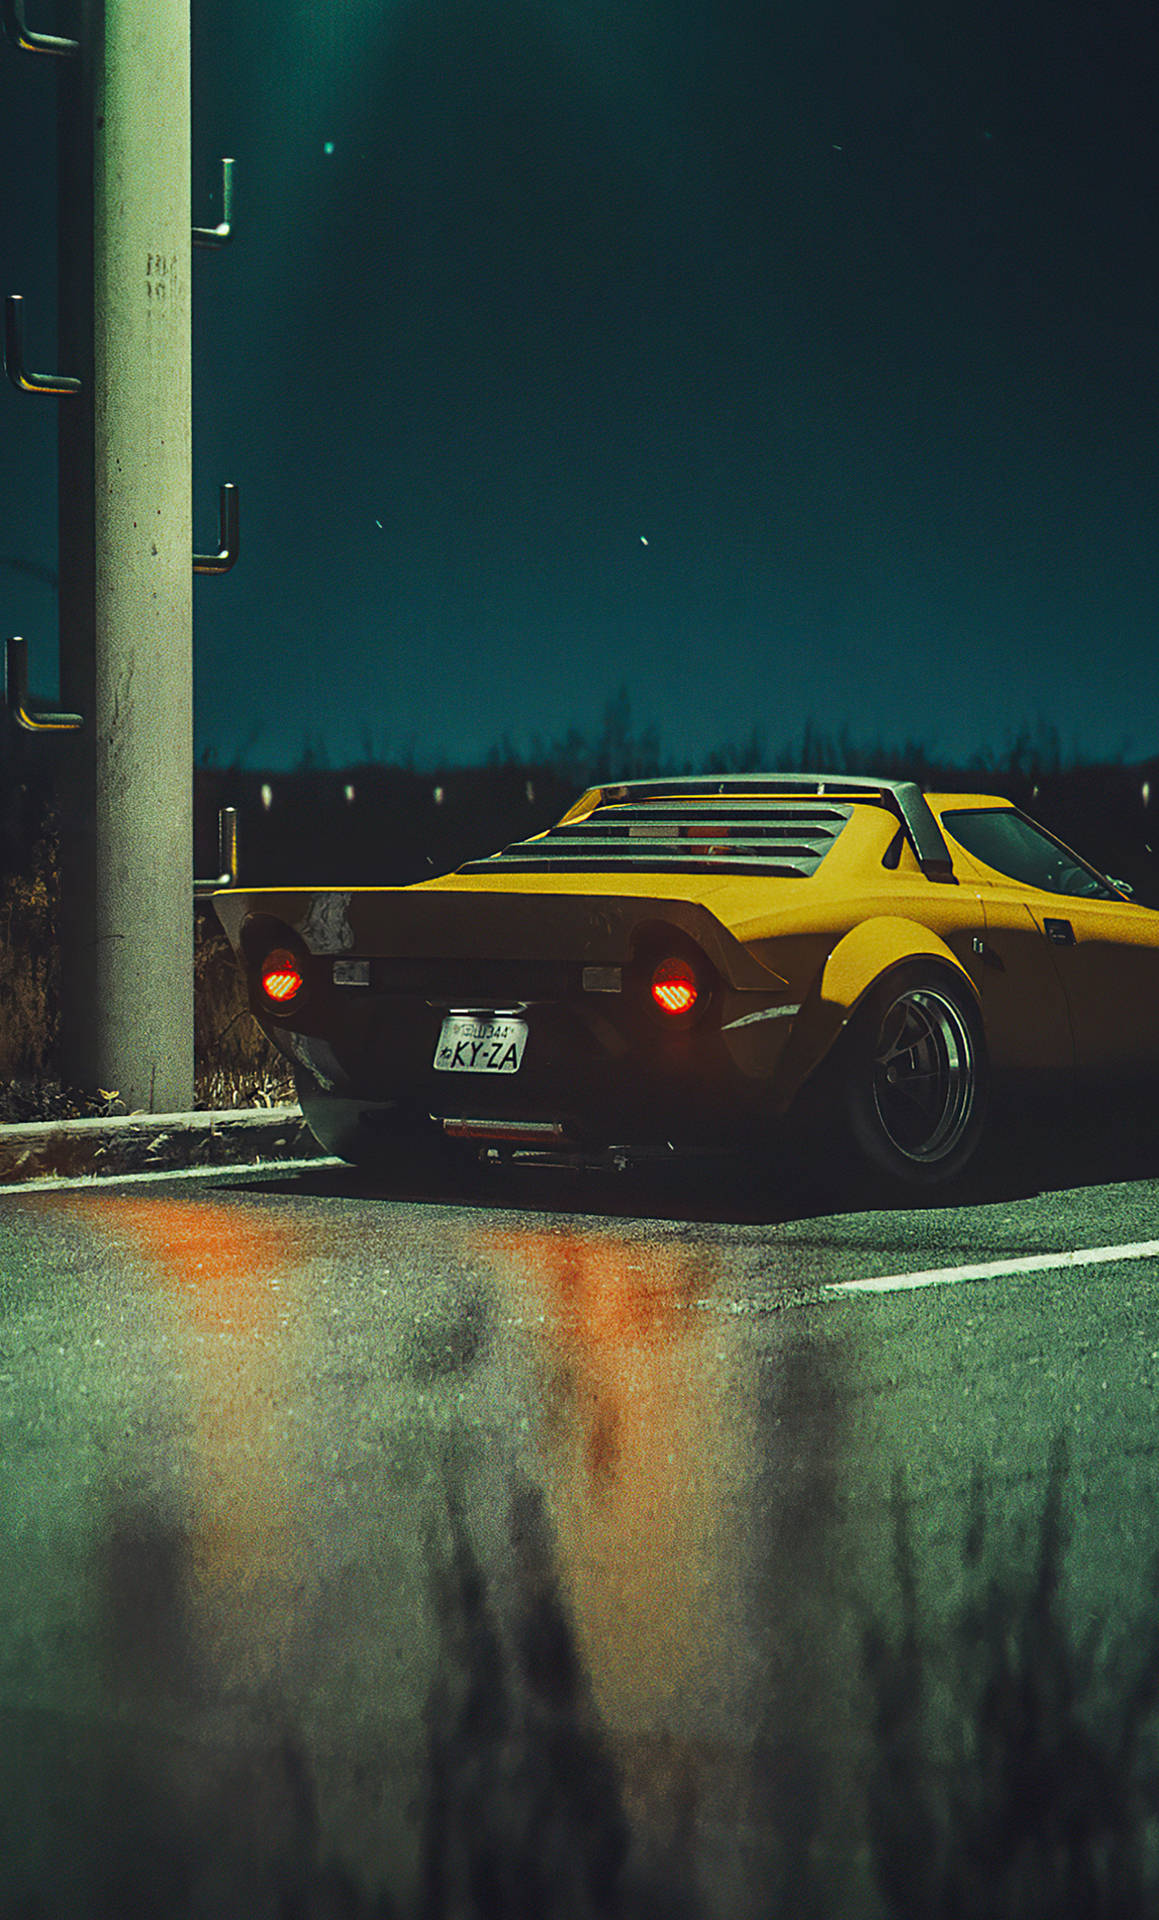 a yellow sports car parked on a street Wallpaper